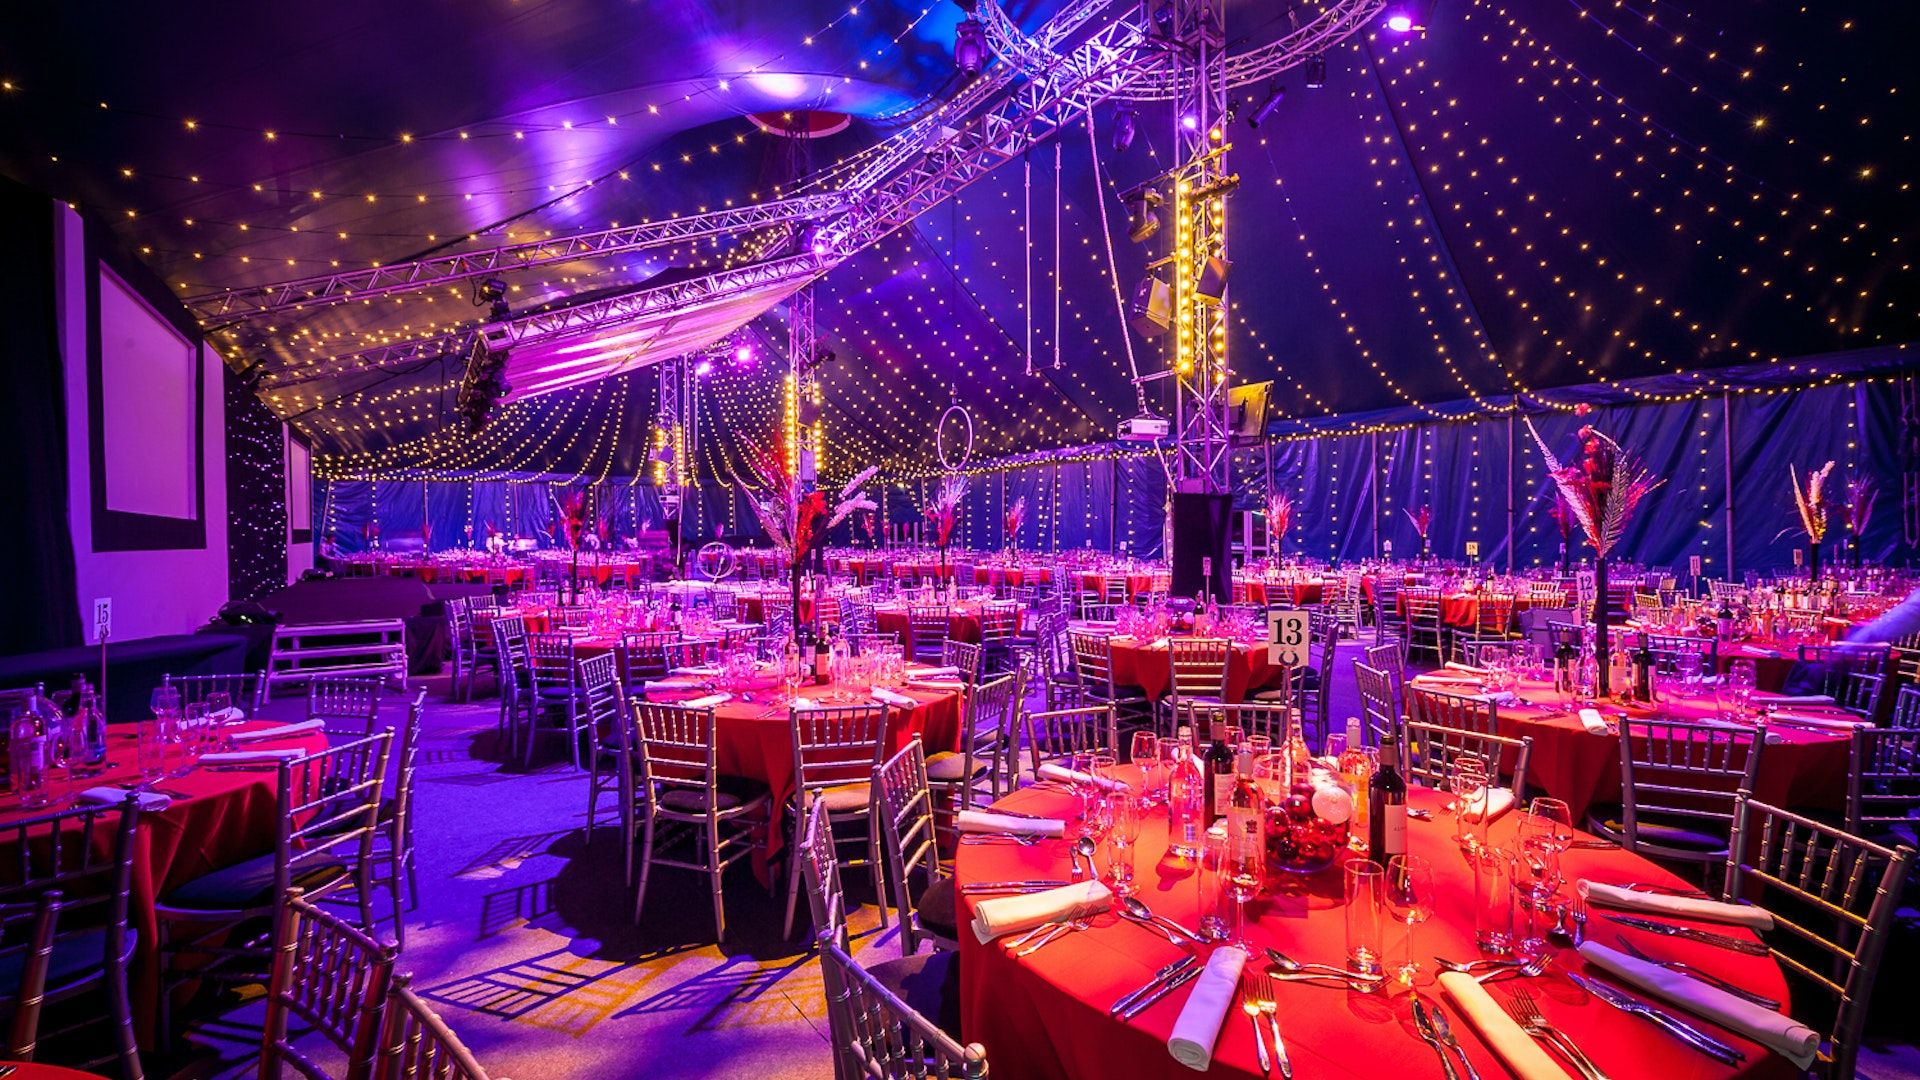 Left Your Christmas Party To The Last Minute? These 7 Amazing Venues Have You Covered